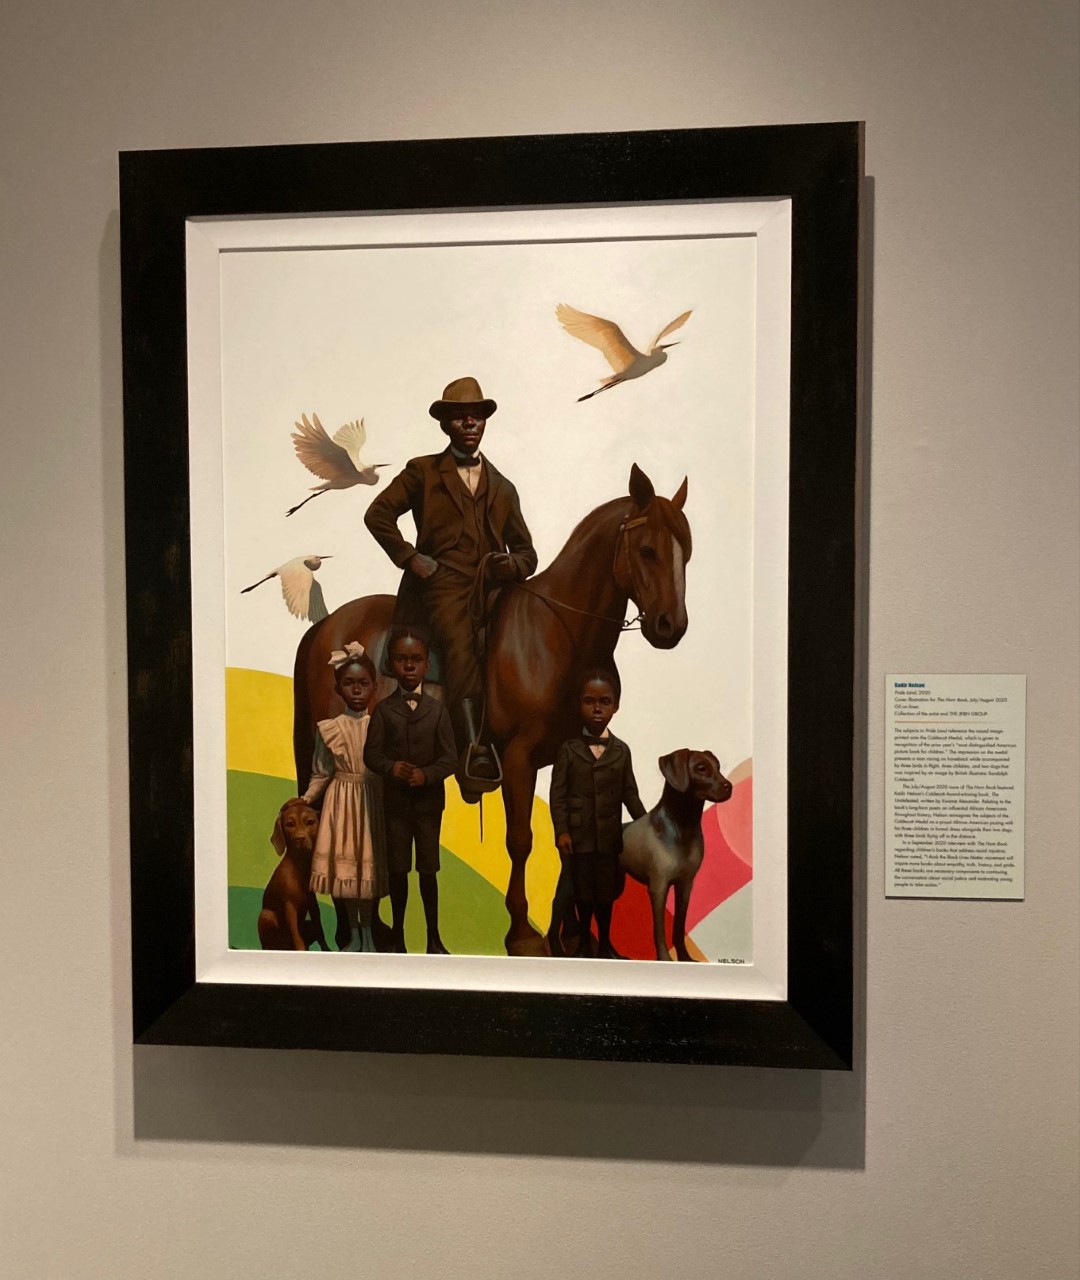 Imprinted: Illustrating Race Exhibit at the Norman Rockwell Museum